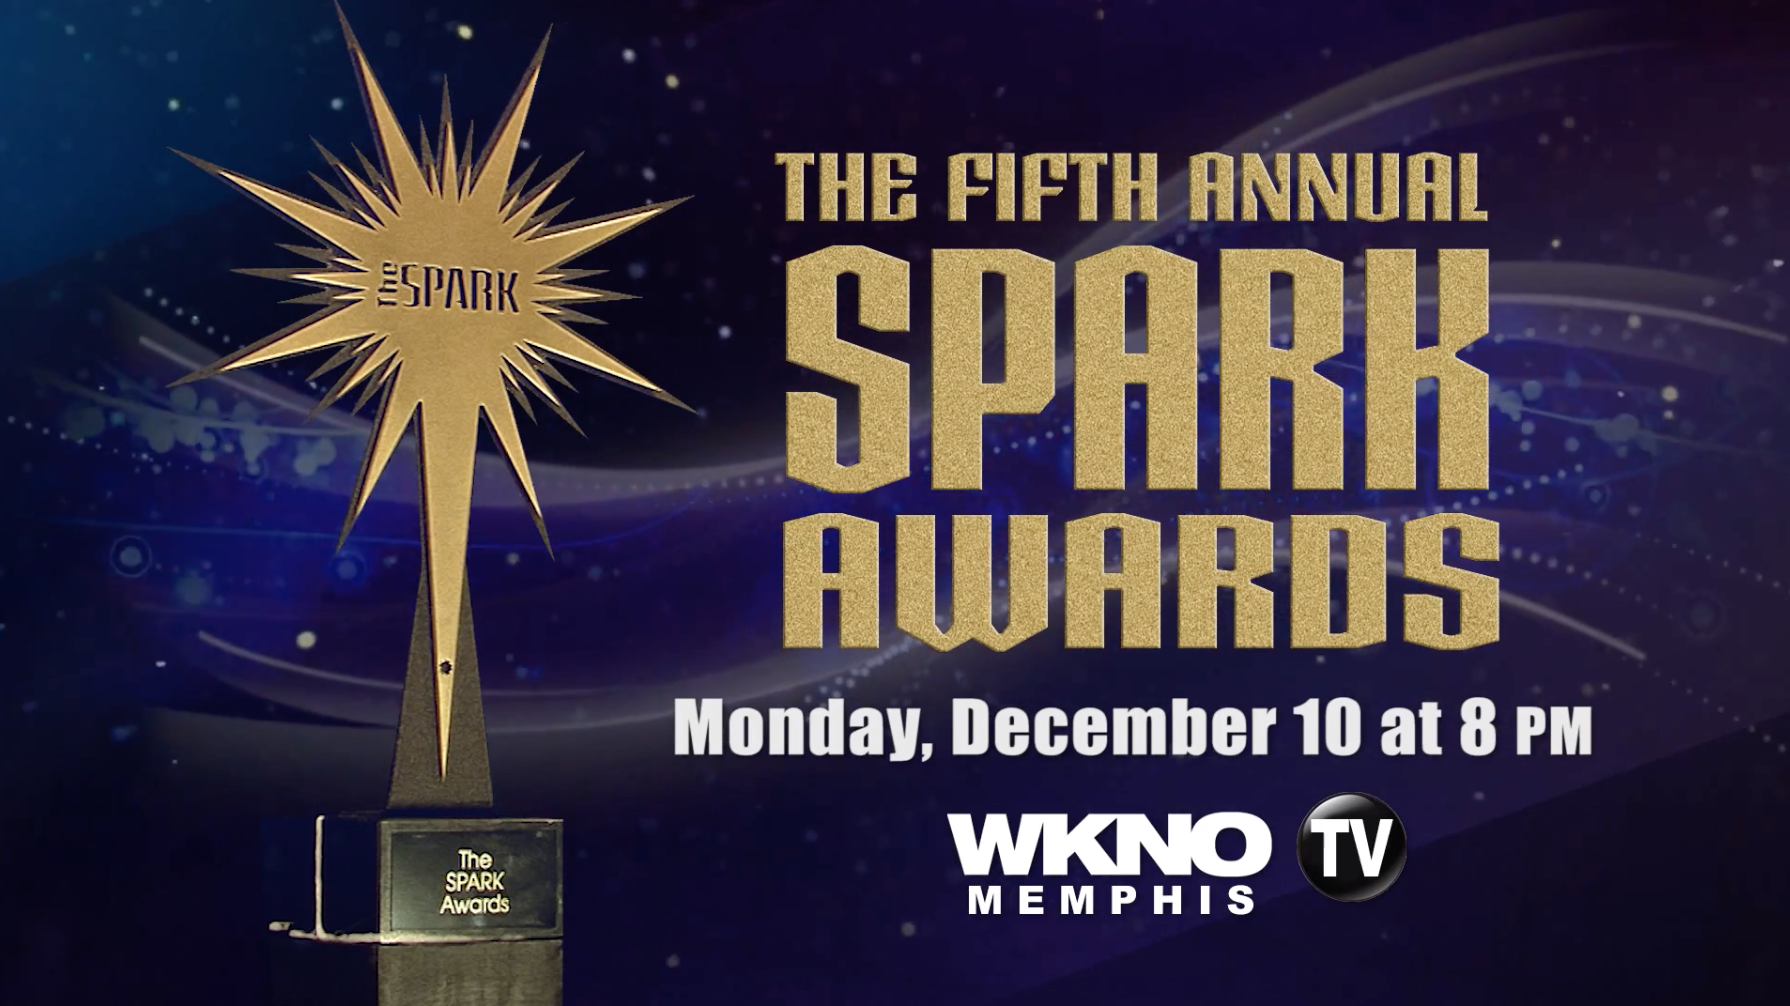 The Spark Awards honors and celebrates the efforts of individuals, nonprofits, corporations, and schools who are igniting change and making a positive impact in the Greater Memphis community.